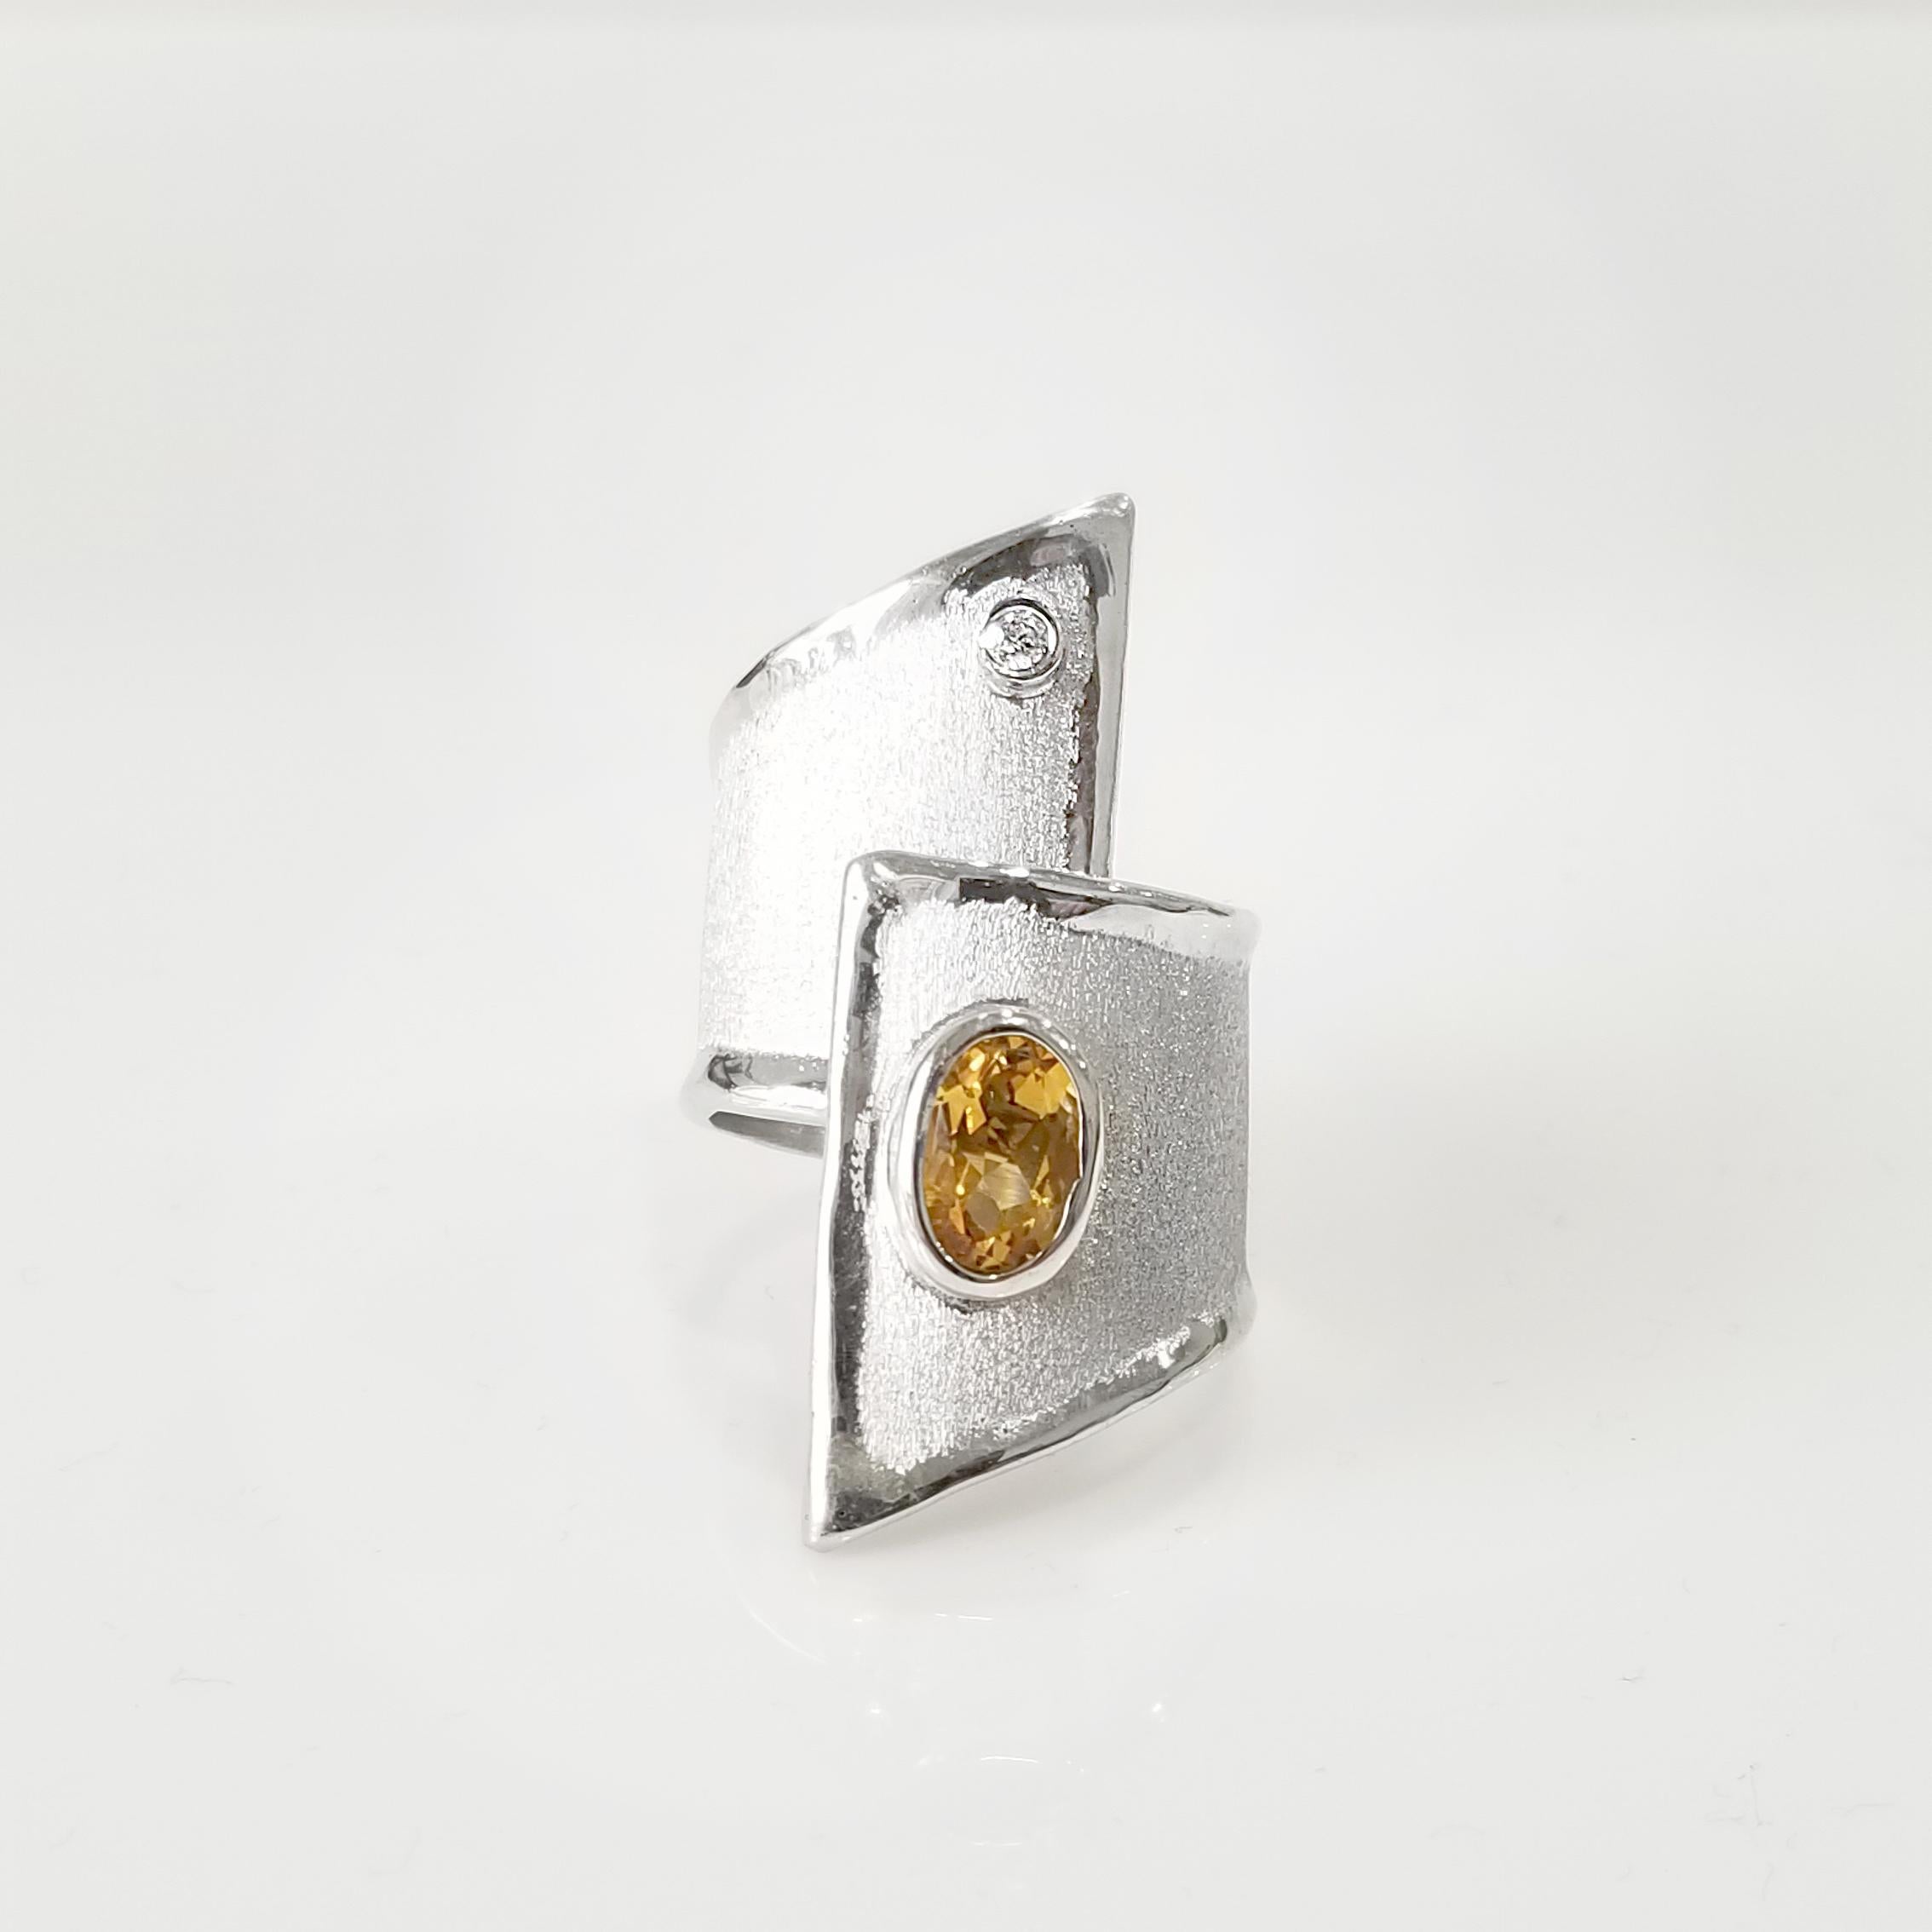 Yianni Creations Ammos Collection 100% Handmade Artisan Ring from Fine Silver, plated with Palladium to protect the jewel from the Elements. The ring is featuring 1.25 Carat Oval Cut Citrine accompanied by 0.03 Carat Brilliant Cut White Diamond. 